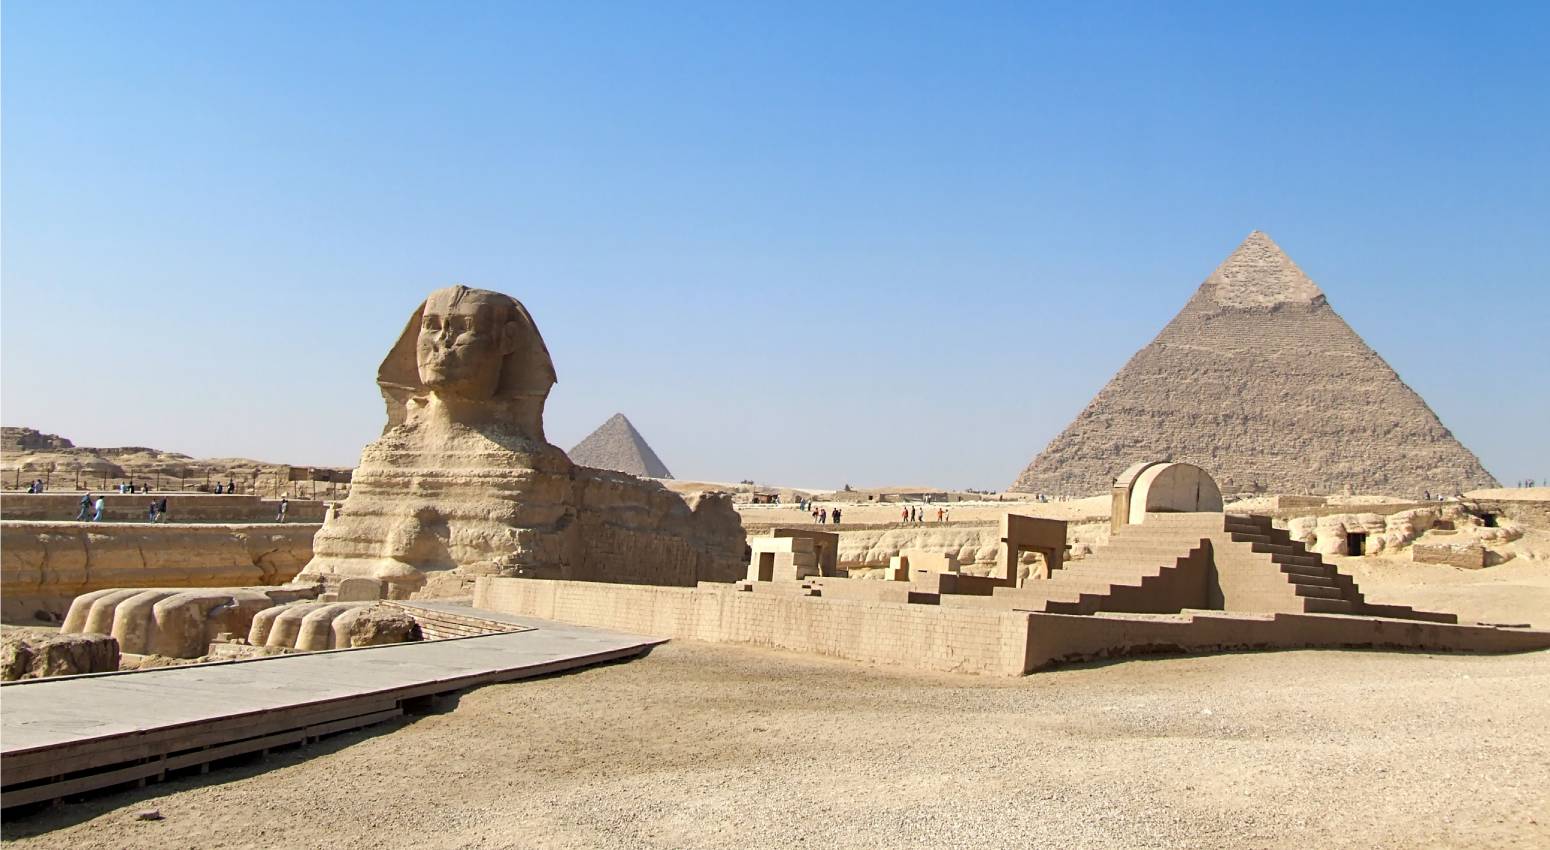 The Great Sphinx in Giza, Egypt, with pyramids in the background